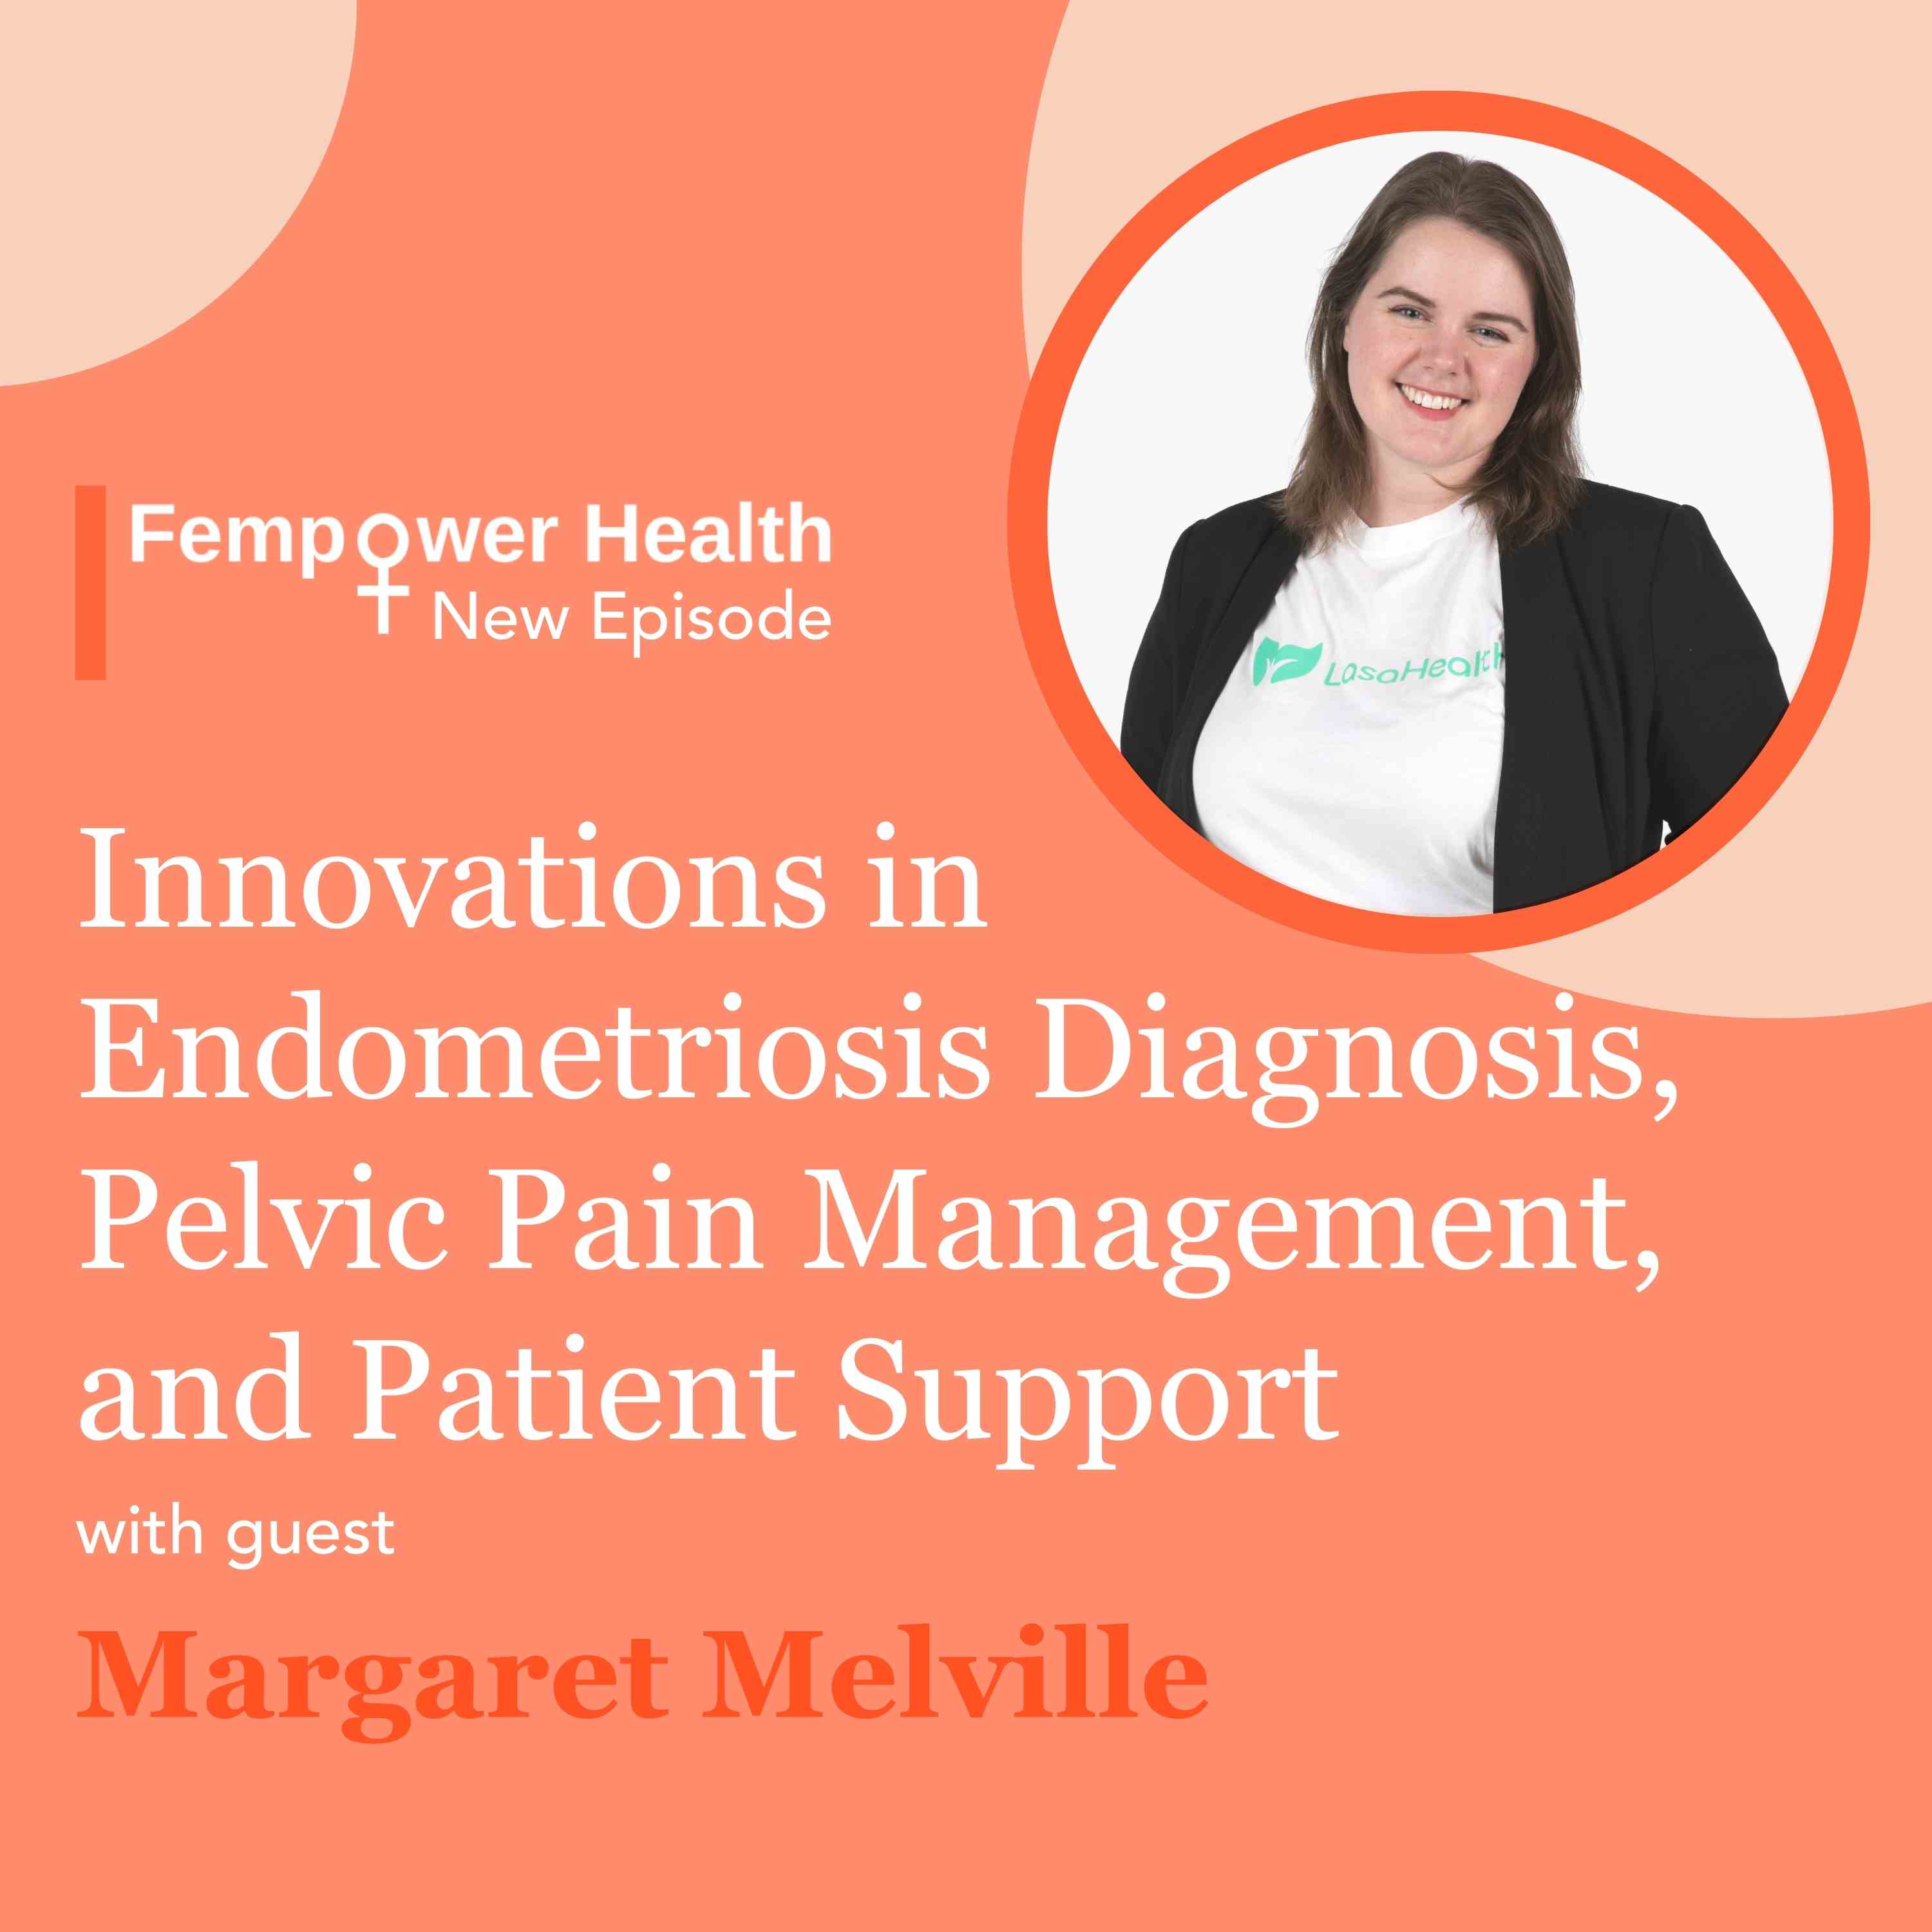 Innovations in Endometriosis Diagnosis, Pelvic Pain Management, and Patient Support